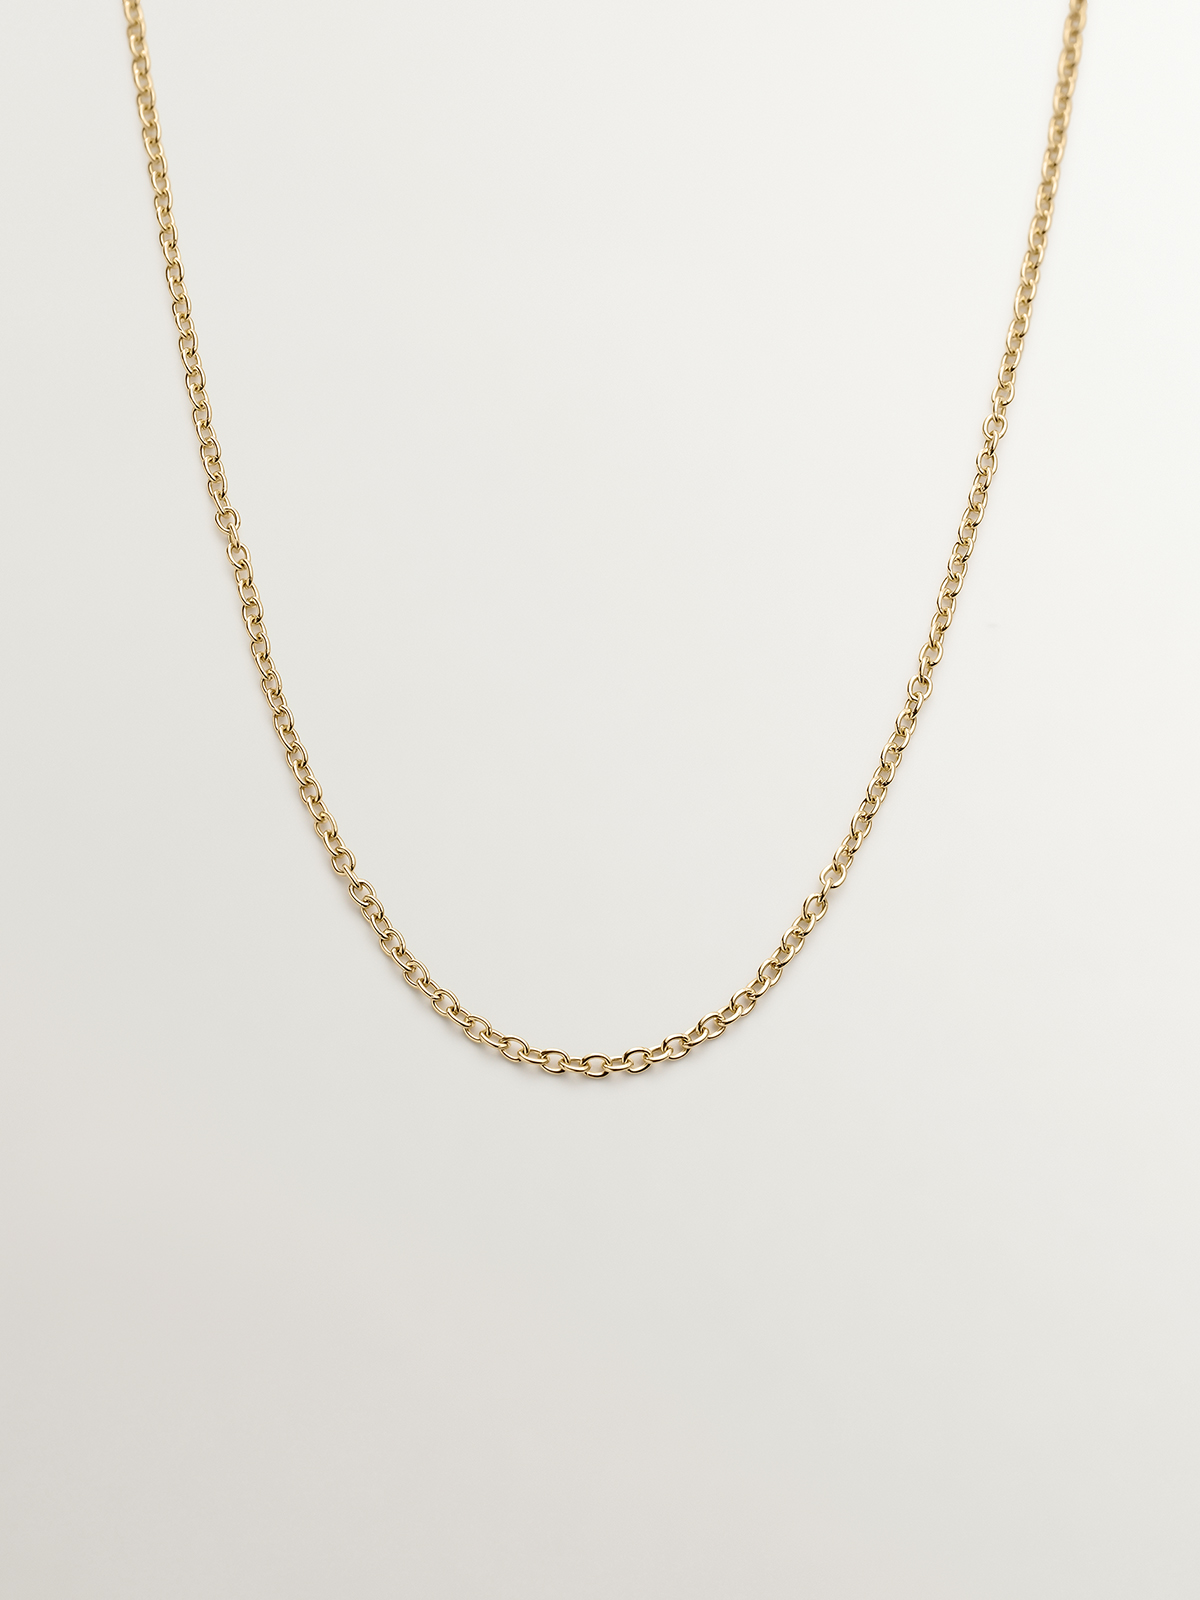 Fine rolo link chain in 9K yellow gold